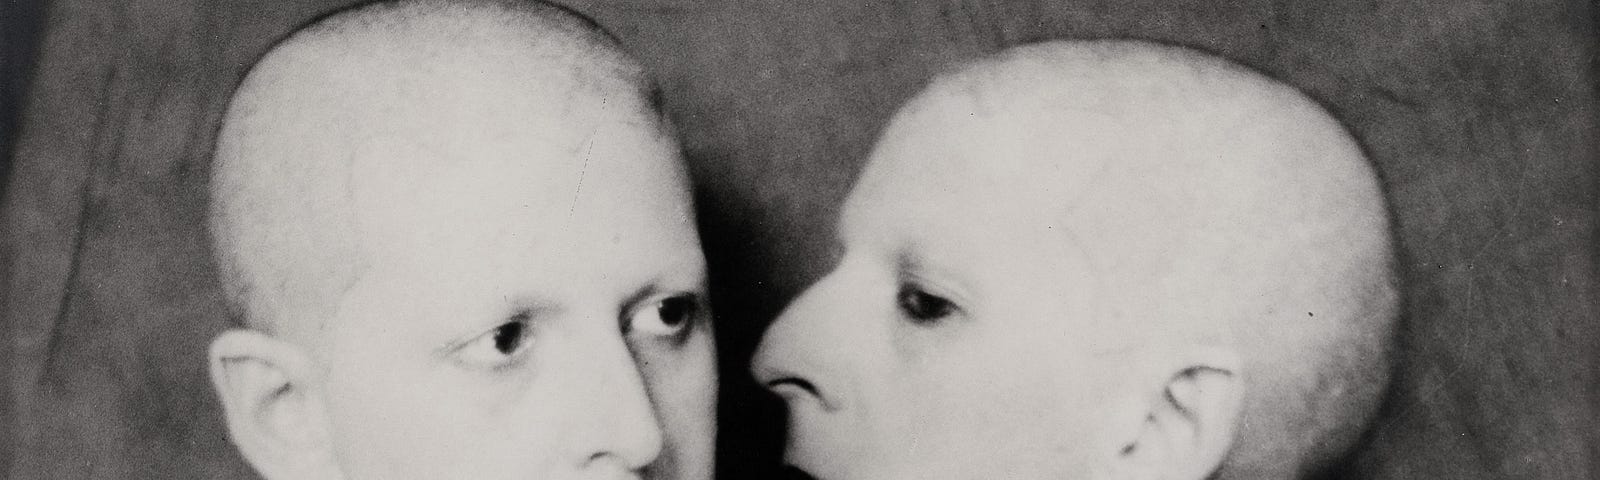 When society considered men to be men and women to be women, Schwob chose to be gender ambiguous and called herself by the name “Claude Cahun”. Claude in French could either be a man or a woman. Cahun was a French surrealist photographer and a creative artist. Sometimes she would shave her head, become bald and confront us with an uncompromising stare with a caption reading: “Que me veux-tu?” meaning “What do you want from me?”